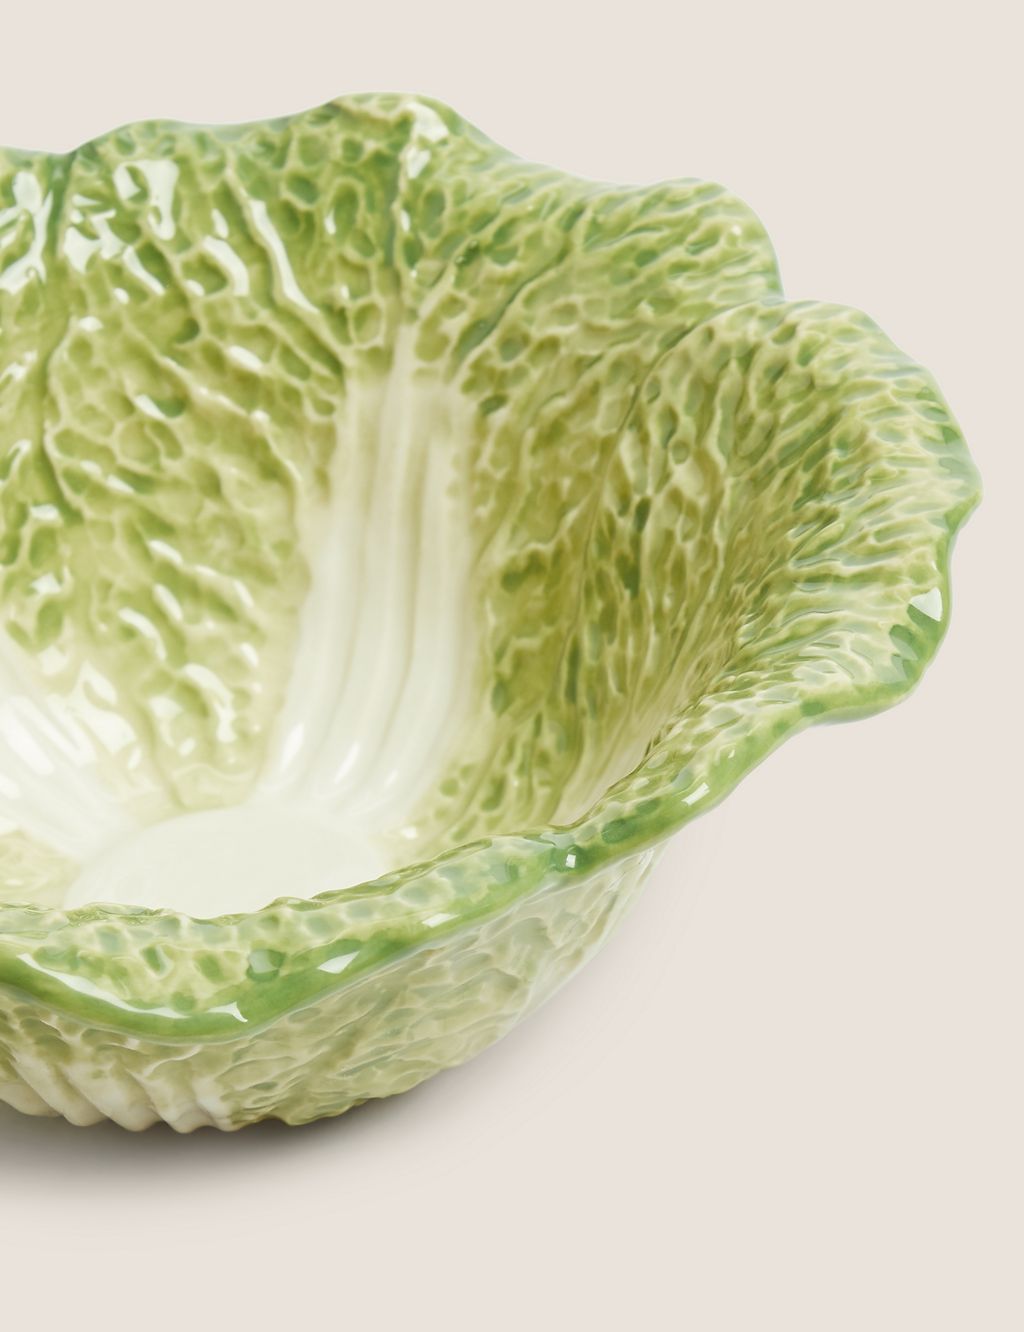 Cabbage Serving Bowl 1 of 4